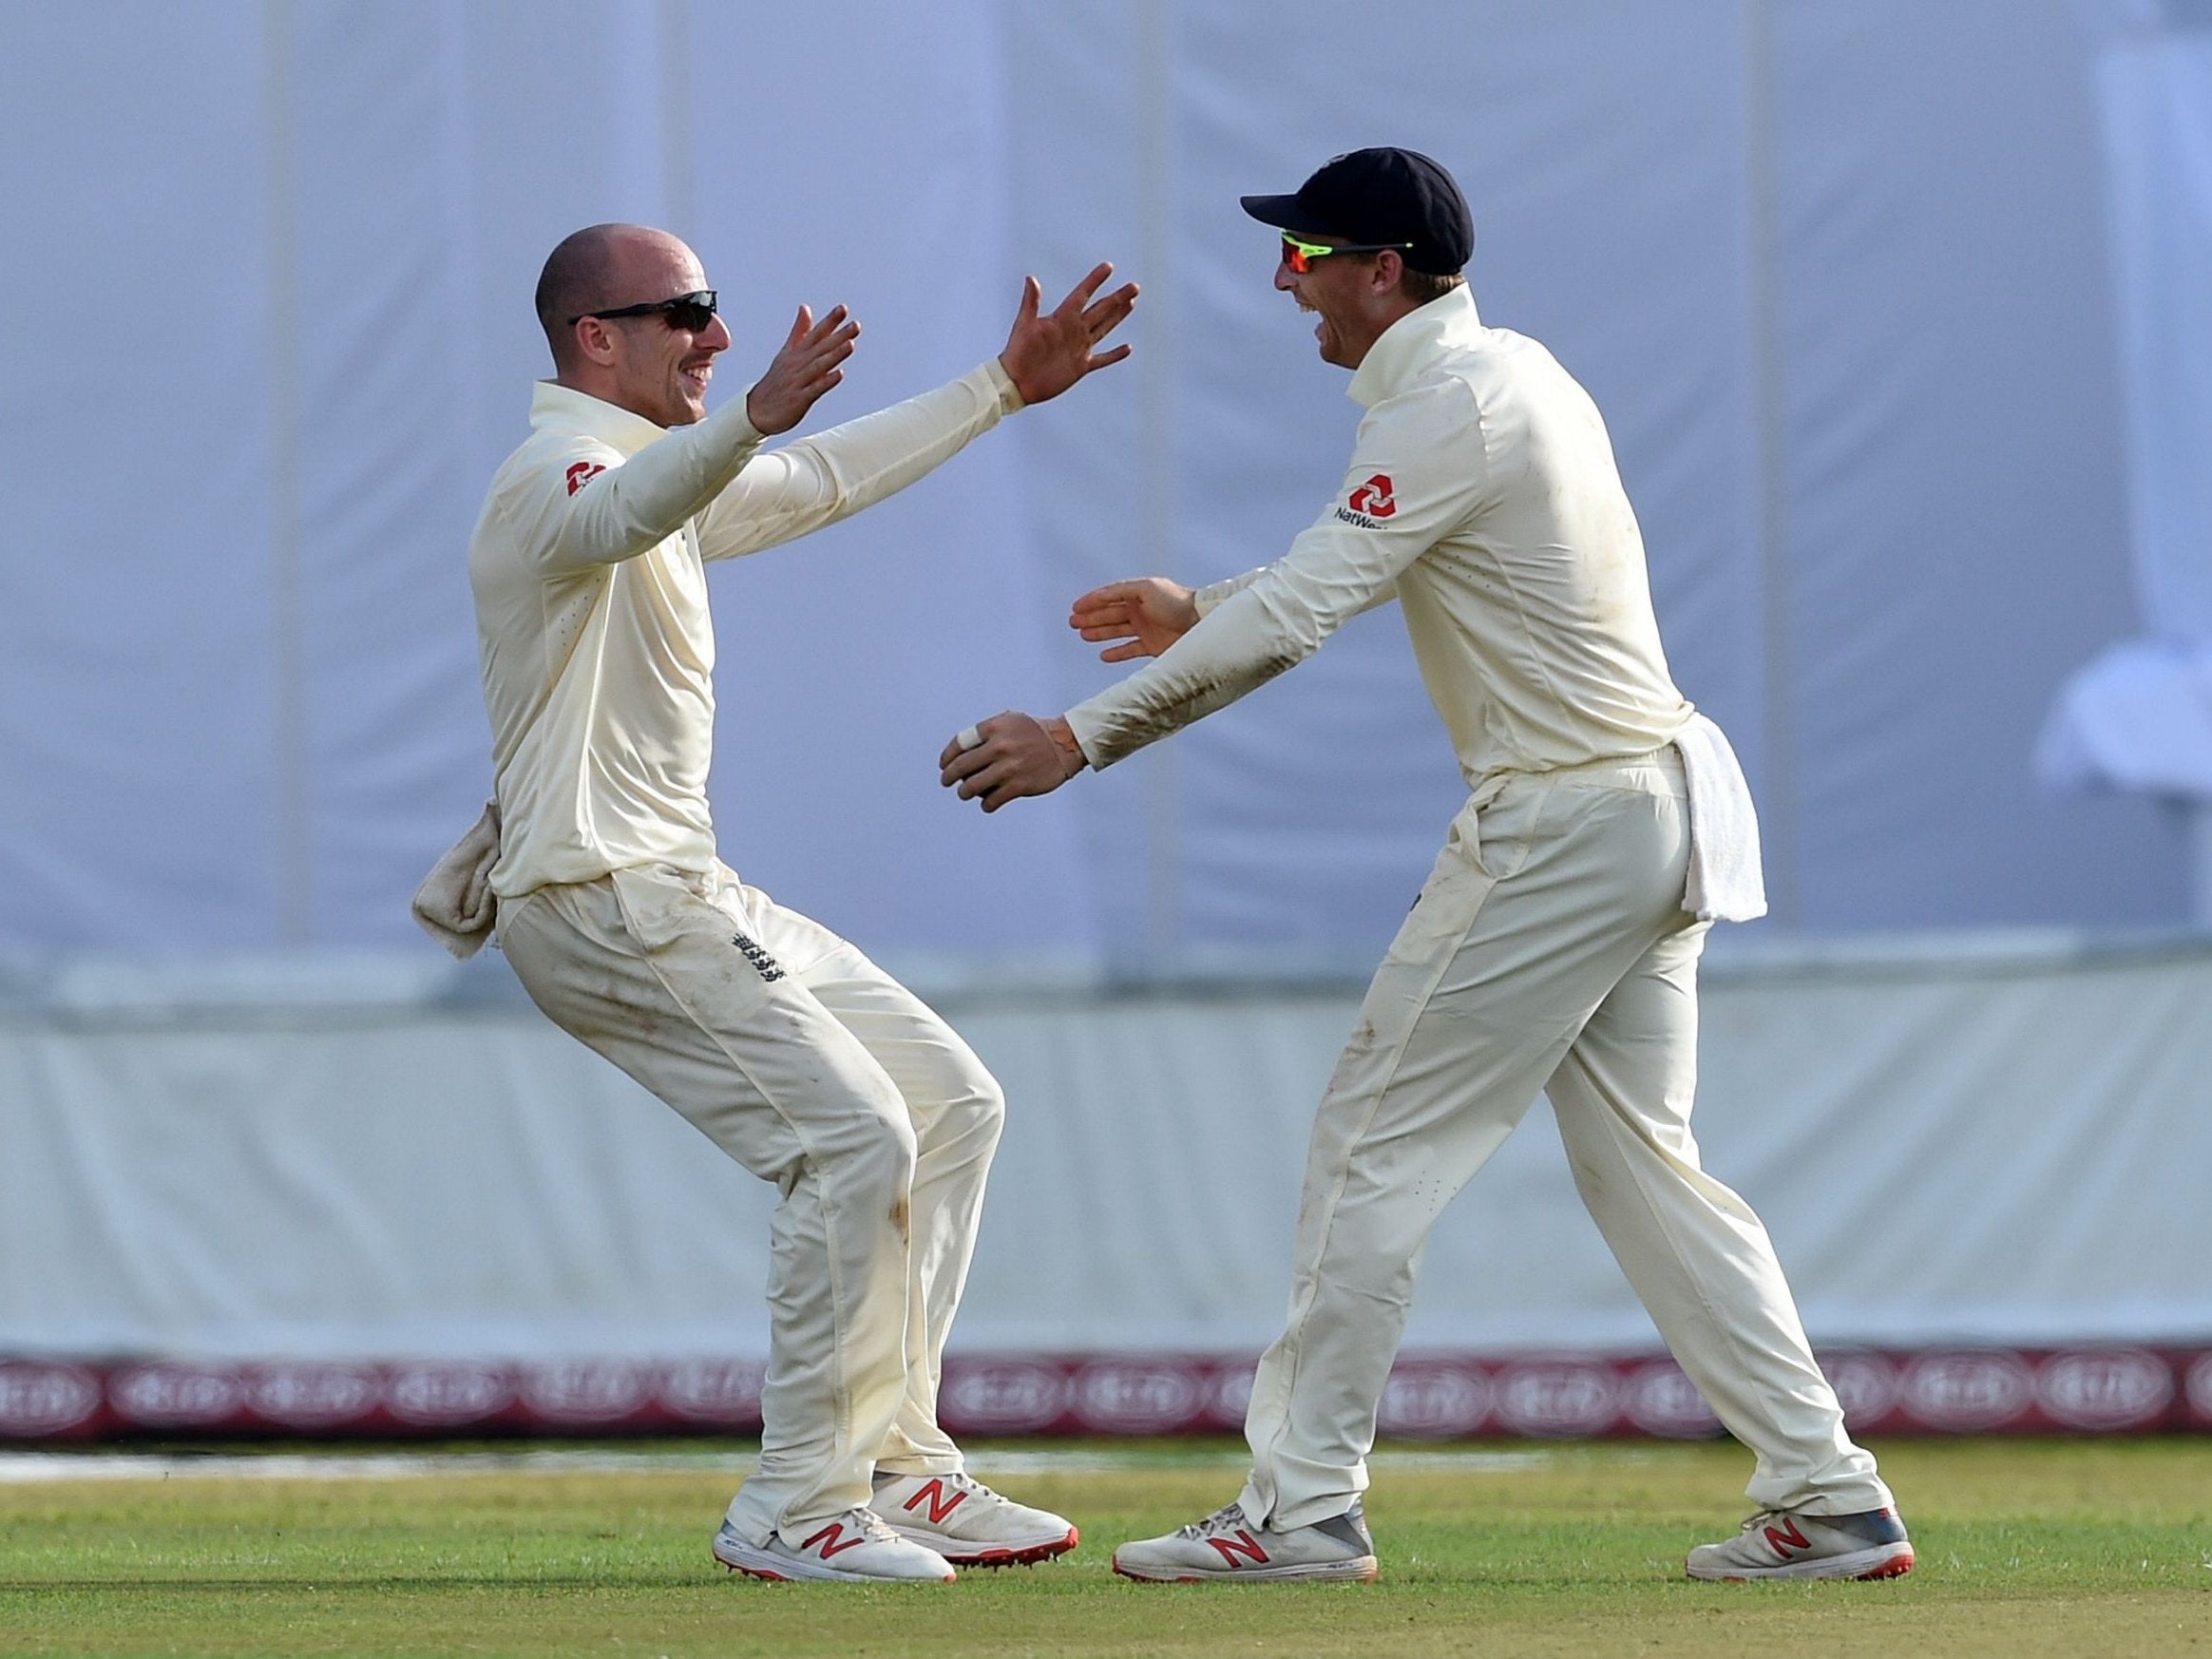 Leach celebrated with Buttler after grabbing his wicket